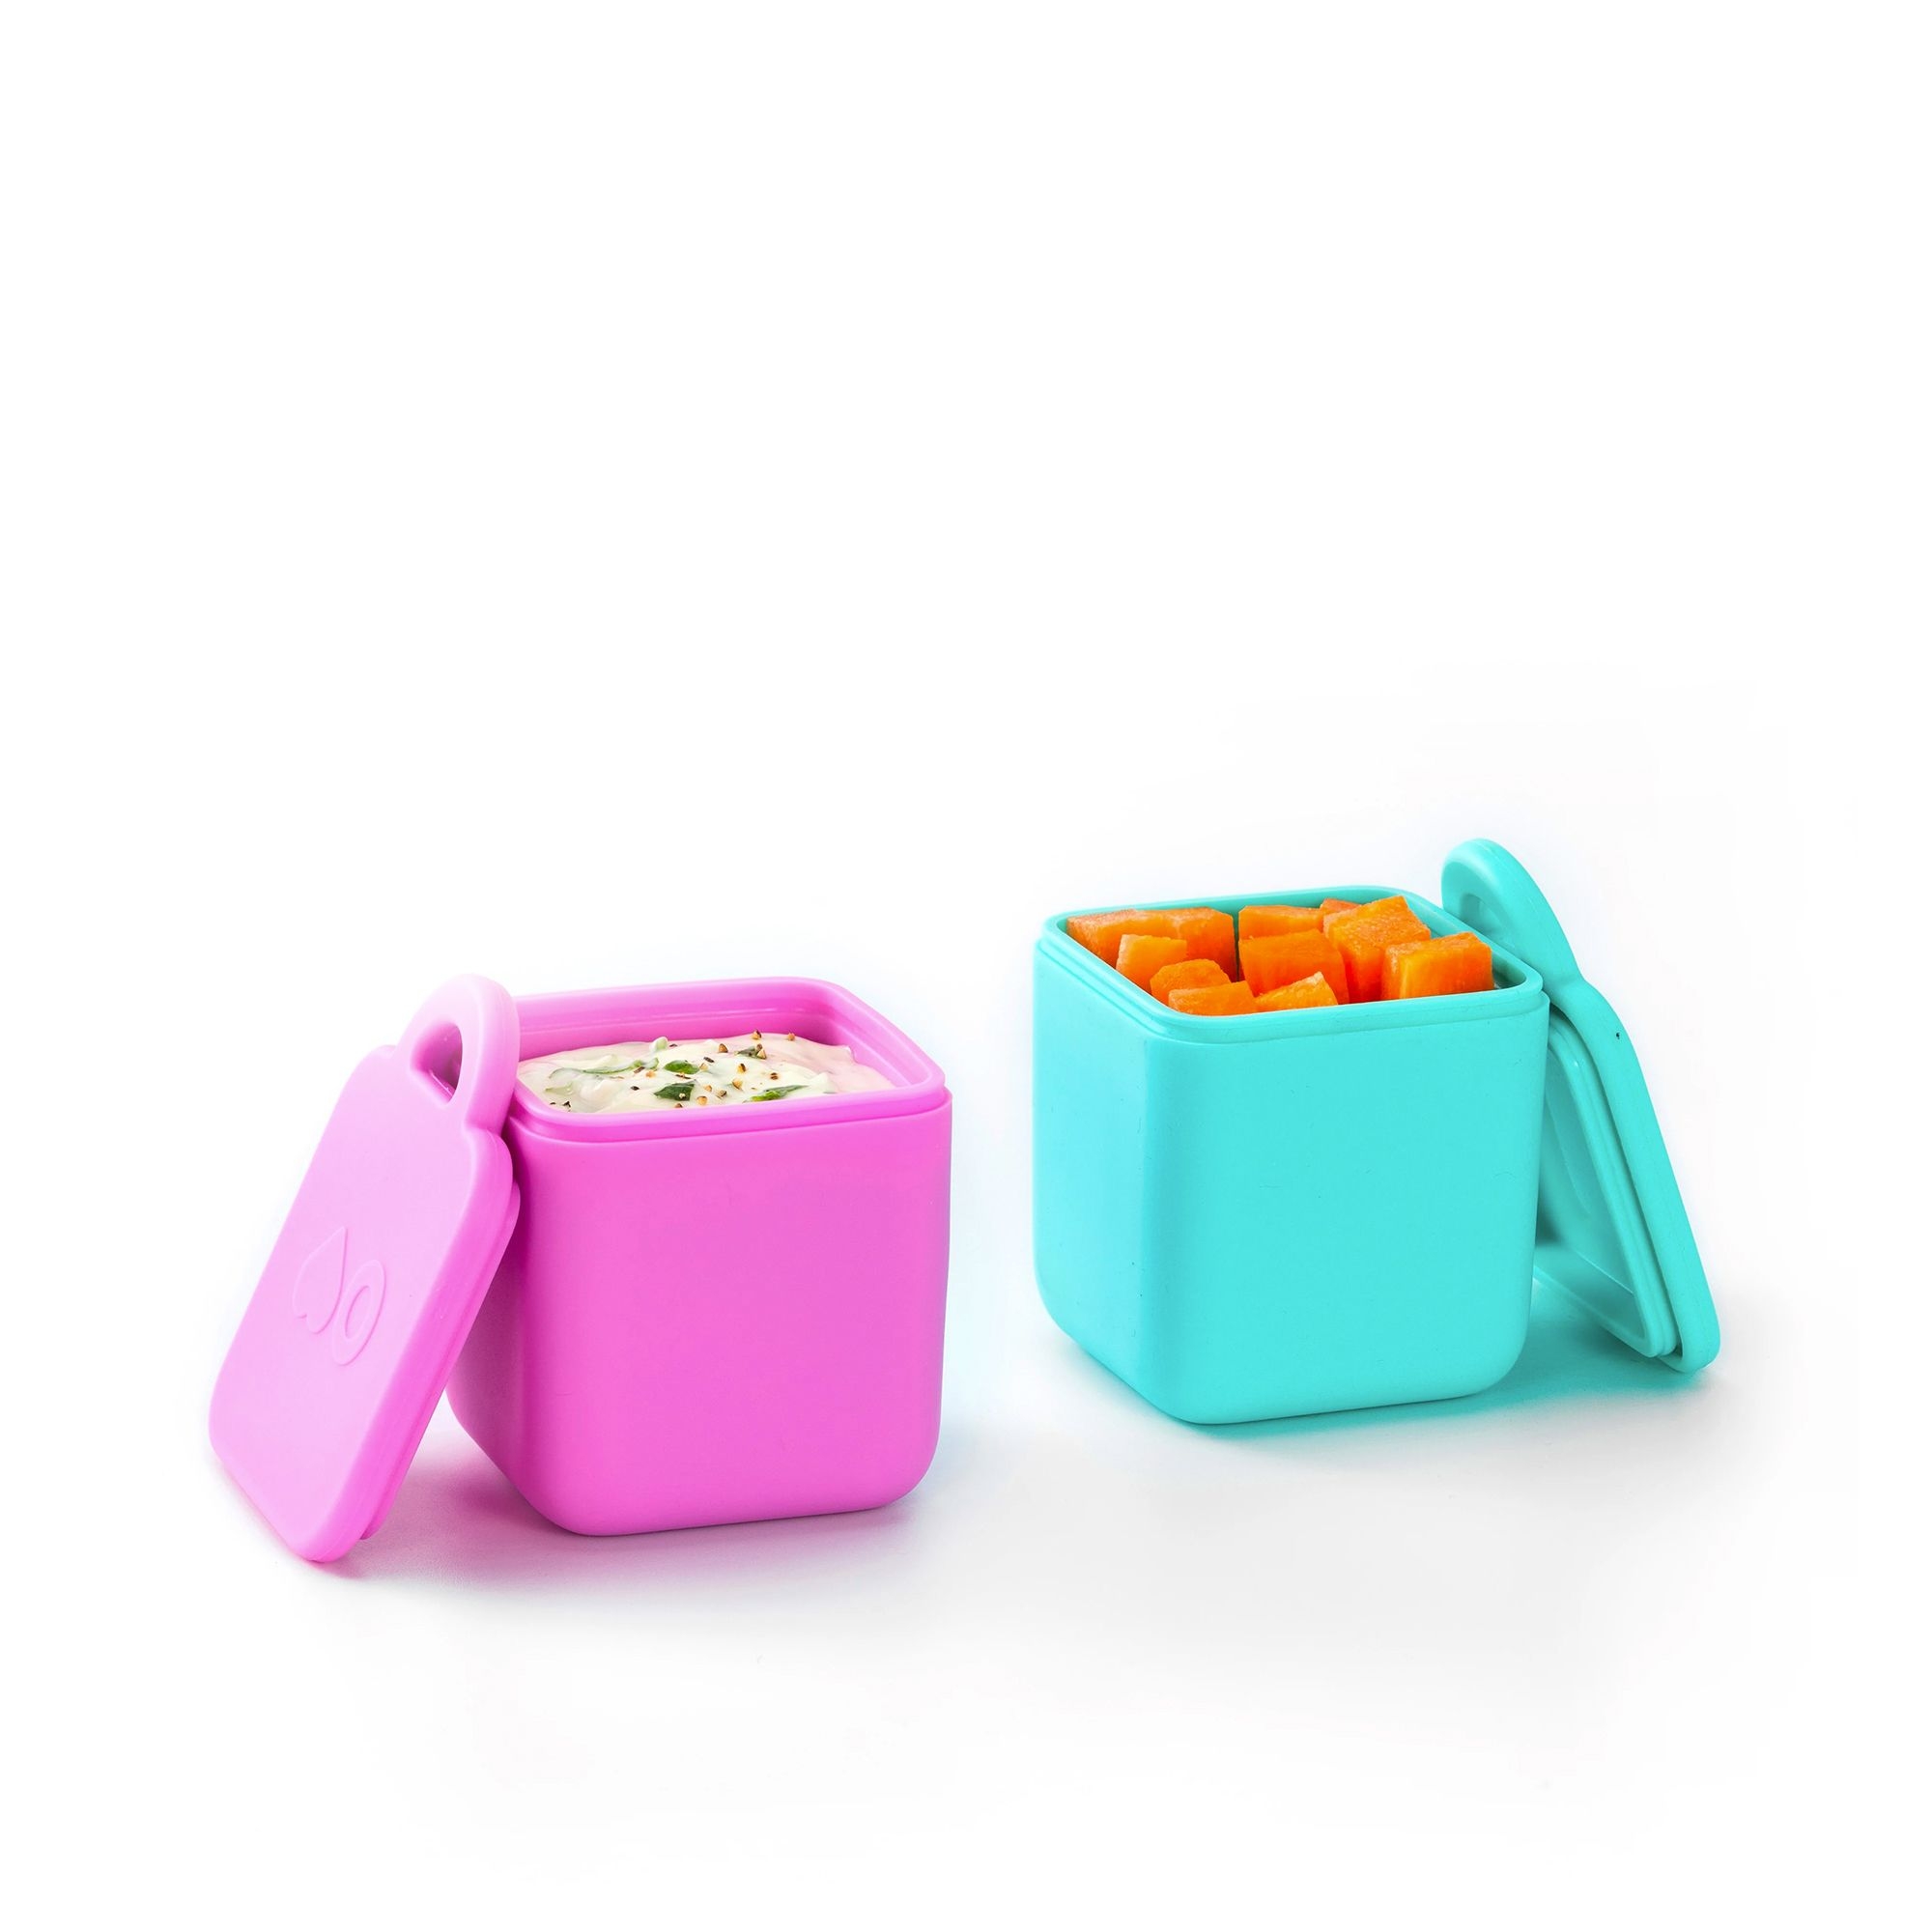 Omie OmieDip Silicone Dip Container Set of 2 Pink and Teal Image 4